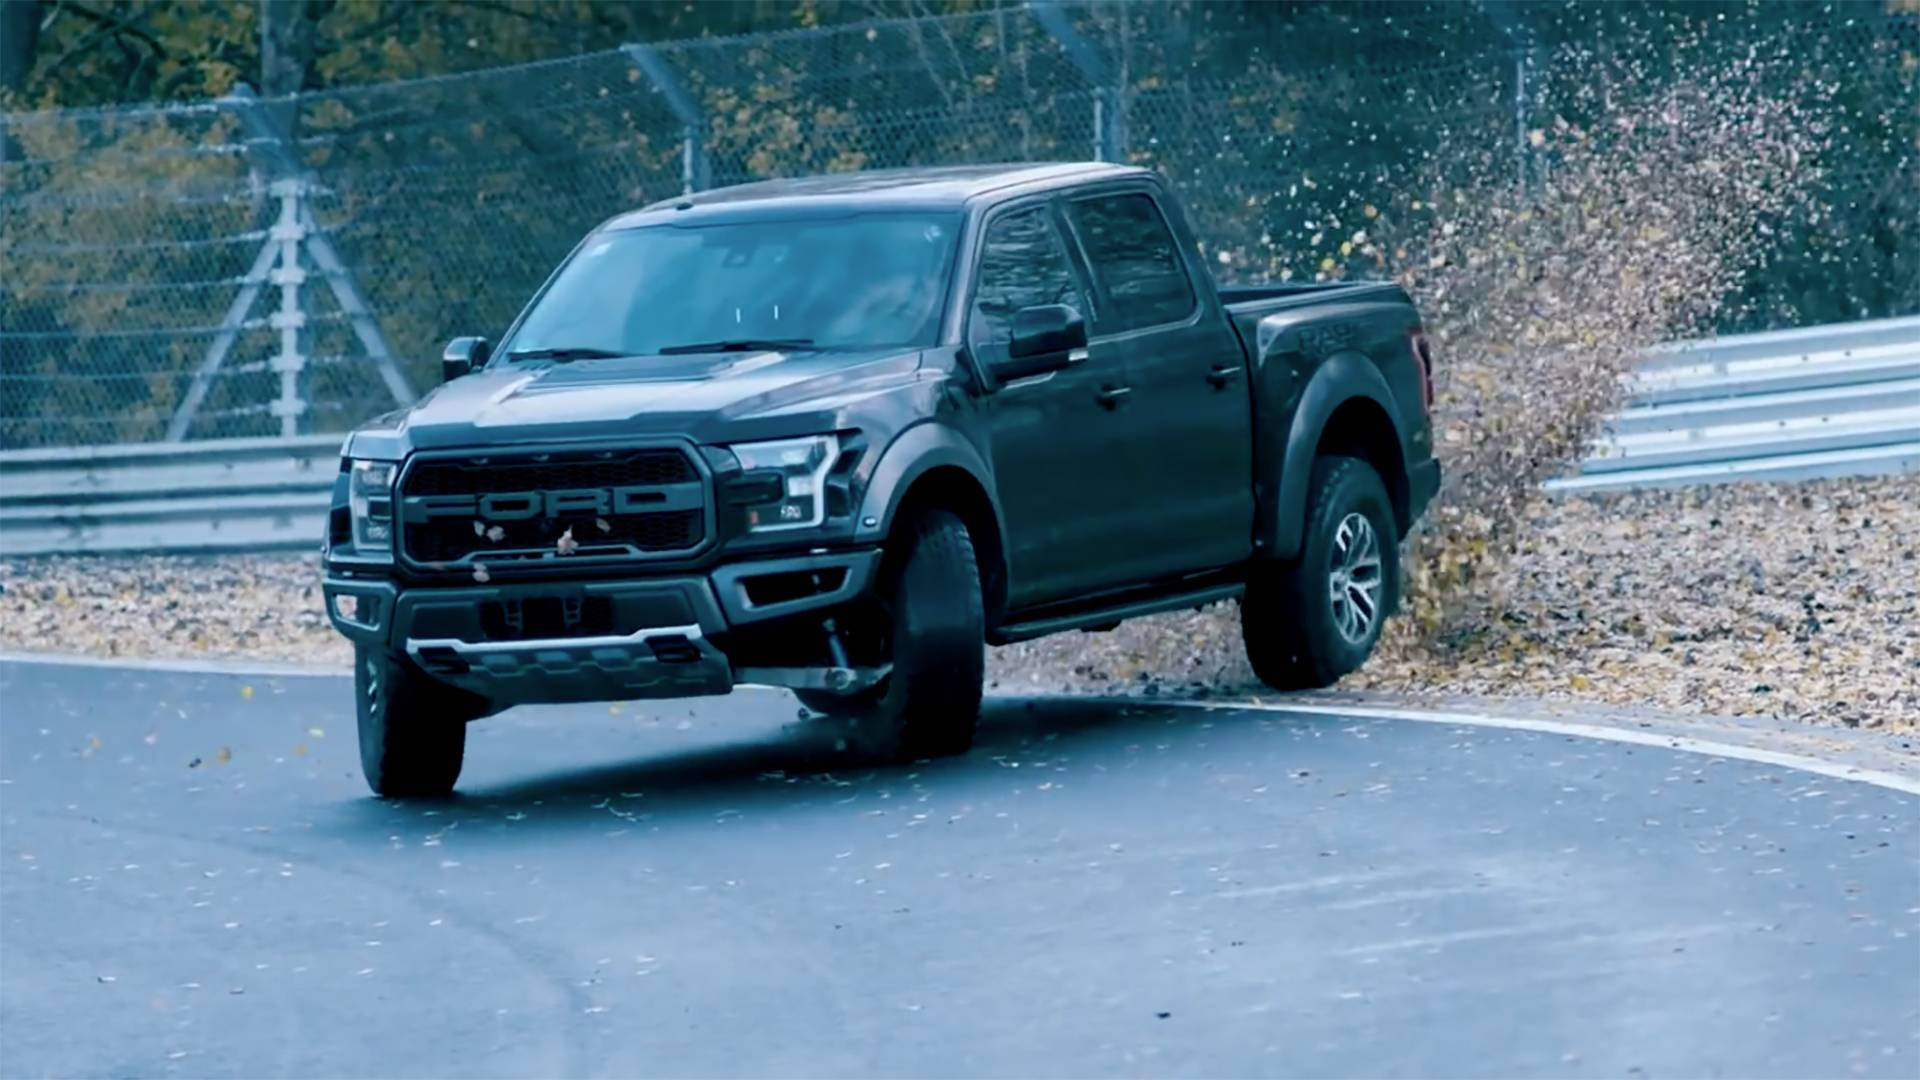 Ford F-150 Raptor - A Black Truck Driving On A Track Background